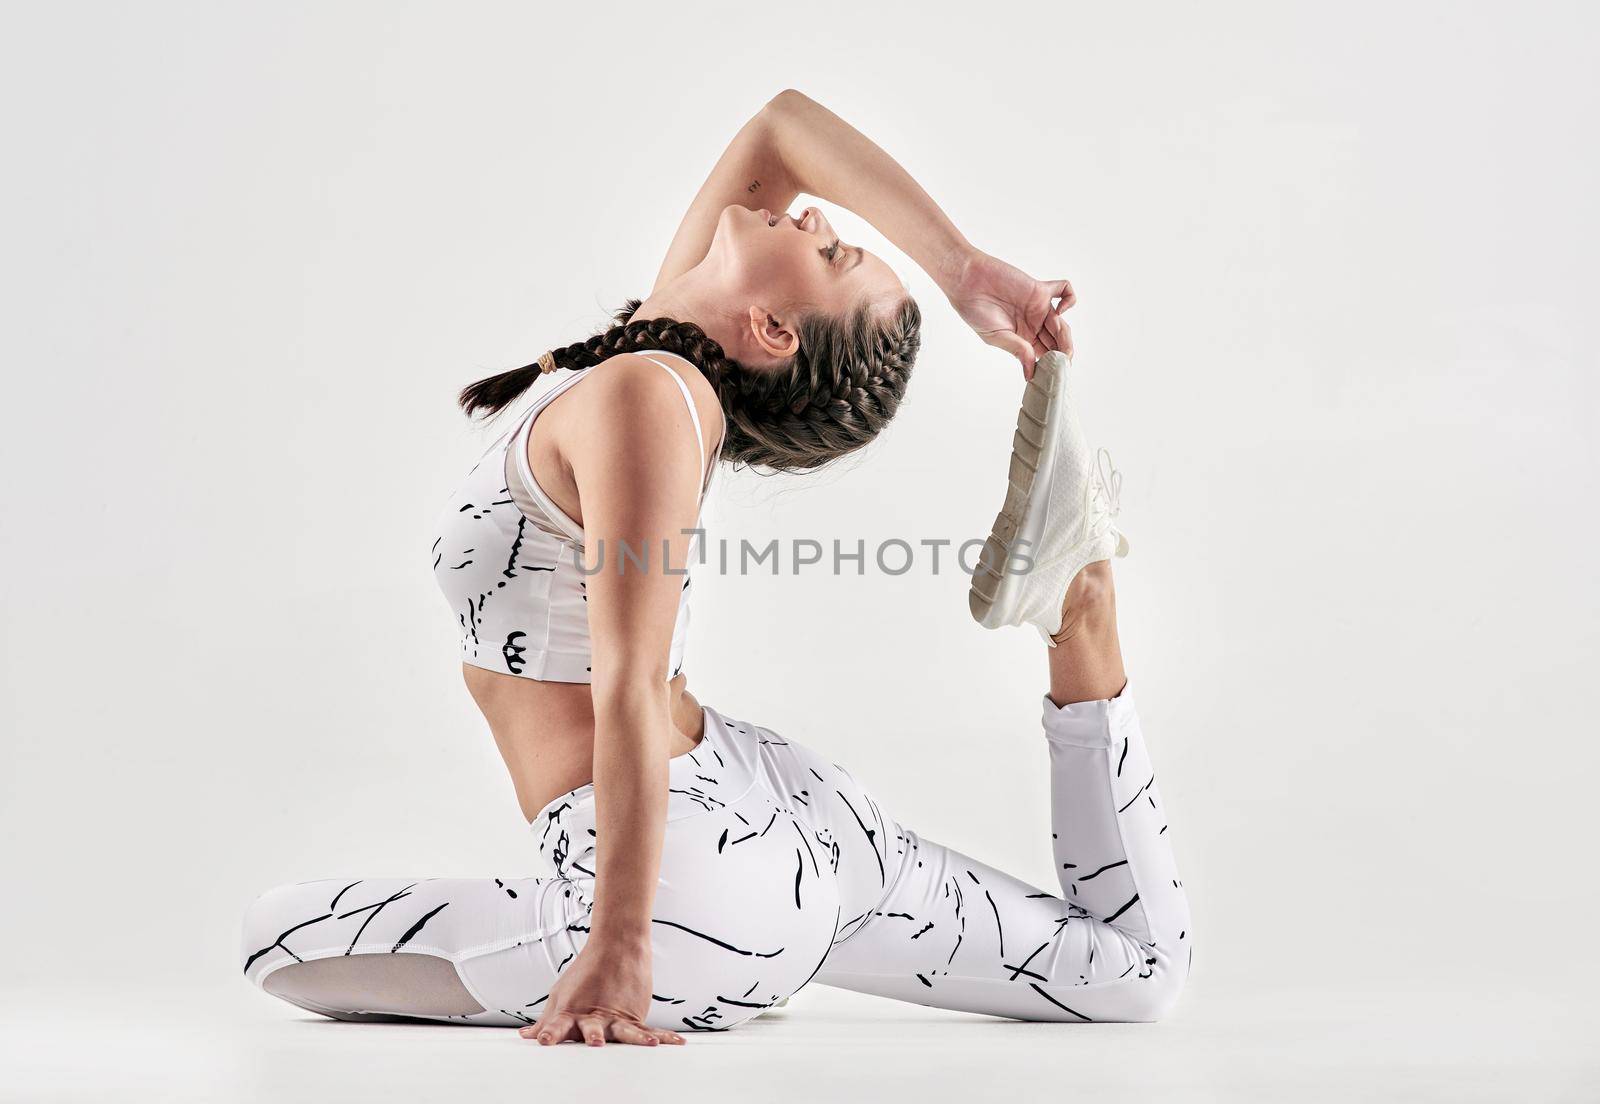 Chin up princess, or the crown slips. Studio shot of a sporty young woman exercising against a white background